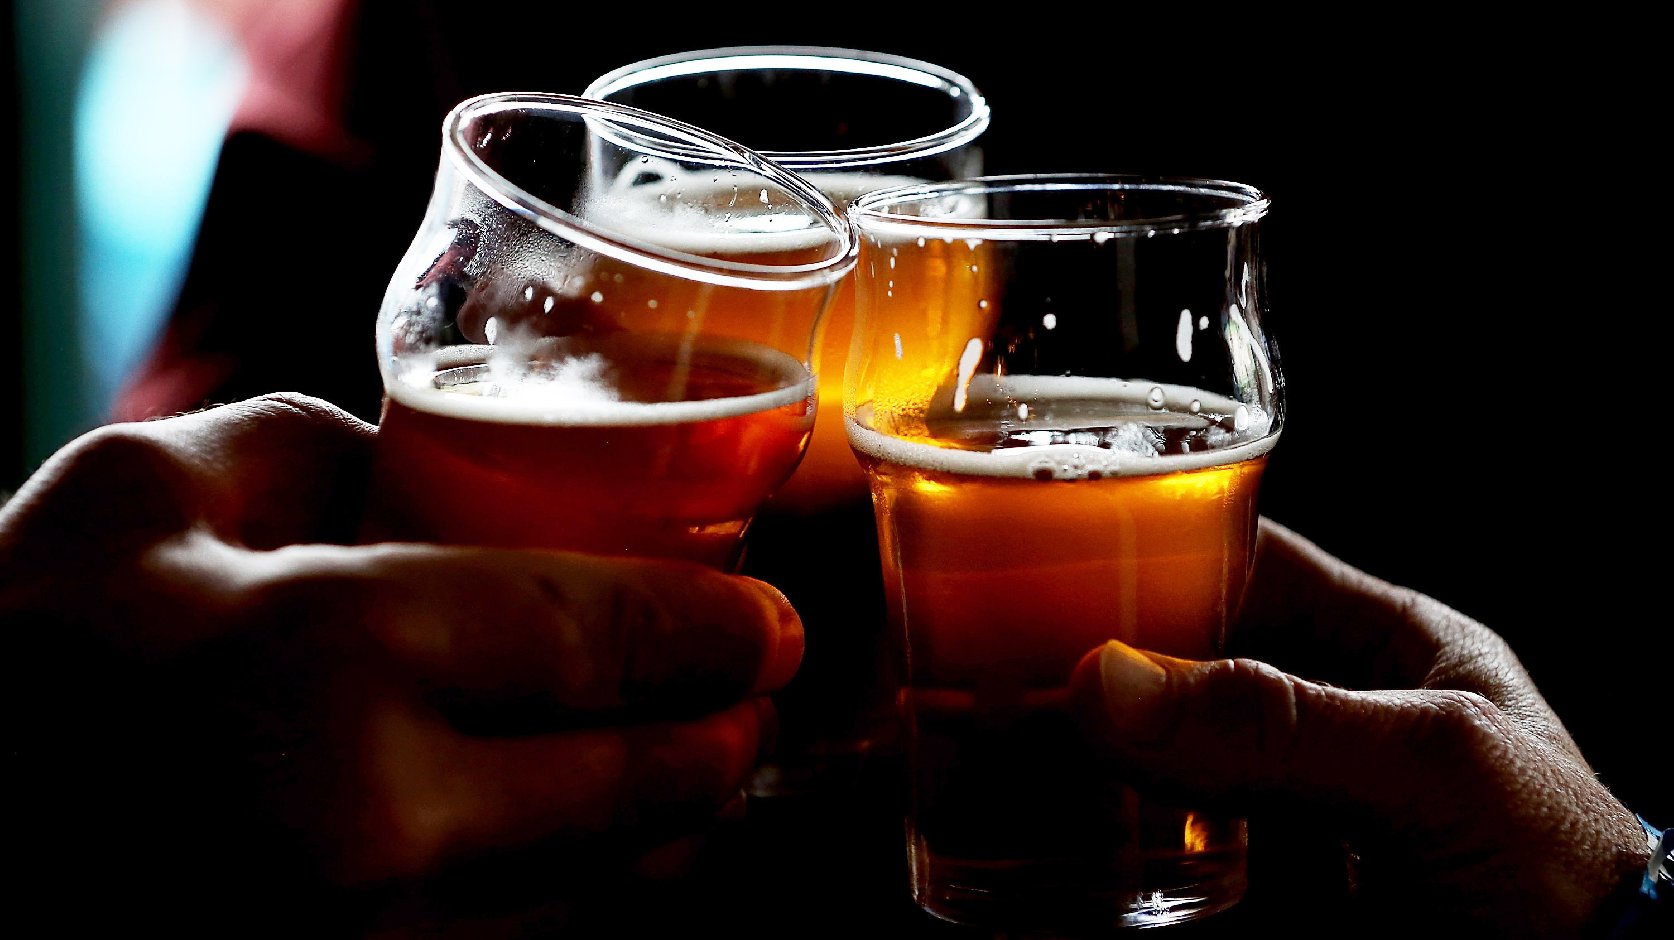 I'll drink to that: Craft beer sales jumped 20 percent last year. Photo: Justin Sullivan/Getty Images